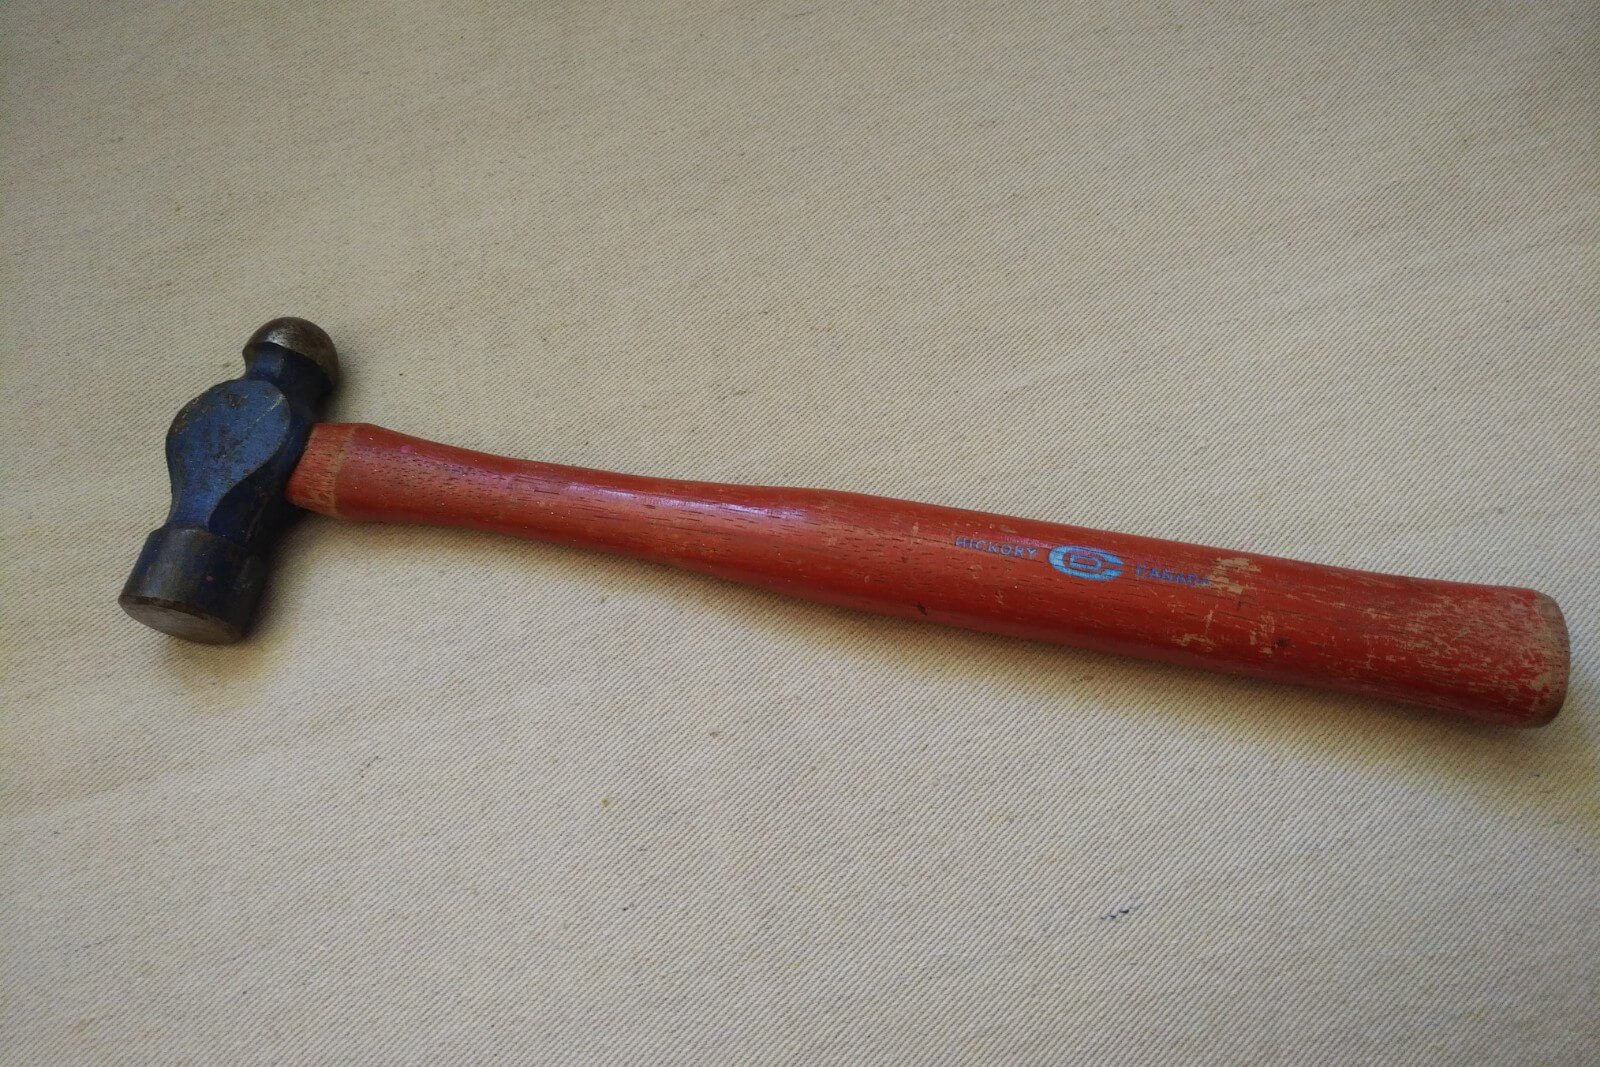 https://vinty.ca/wp-content/uploads/sites/11/2021/06/vintage-tools-gray-canada-ball-pein-hammer-hickory-handle.jpg